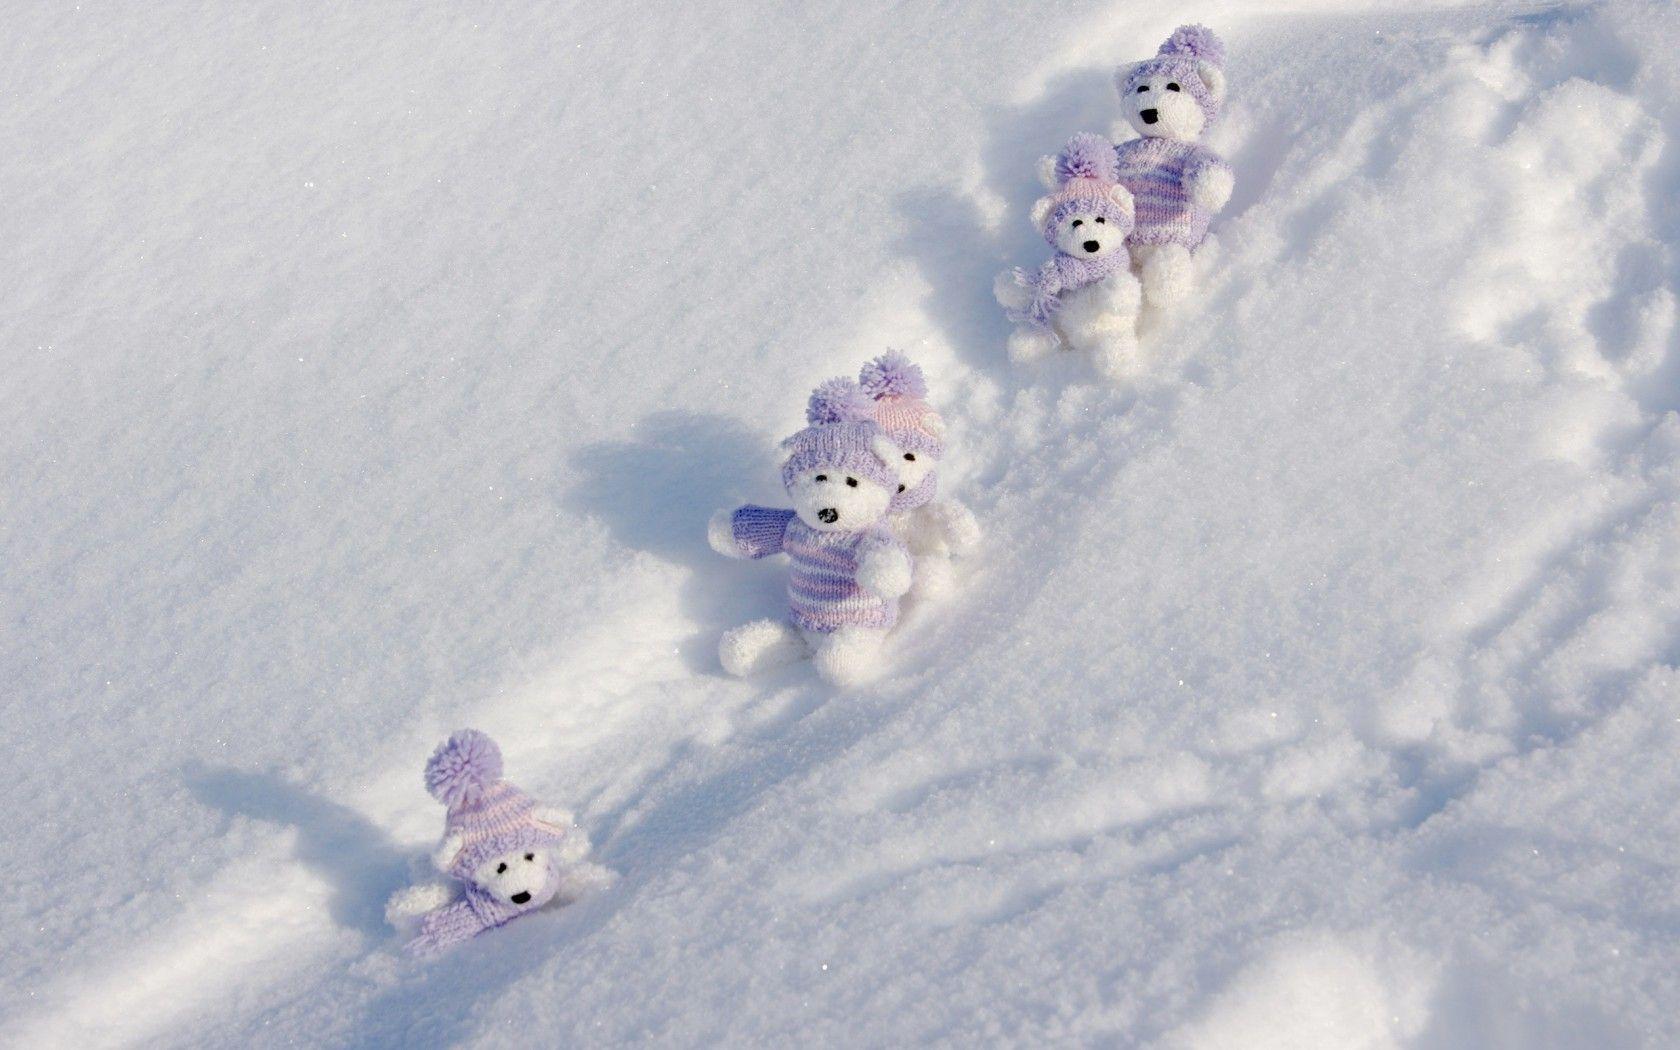 Fascinating Teddy Bears Sliding On Snow Wide Wallpaper 1680x1050PX